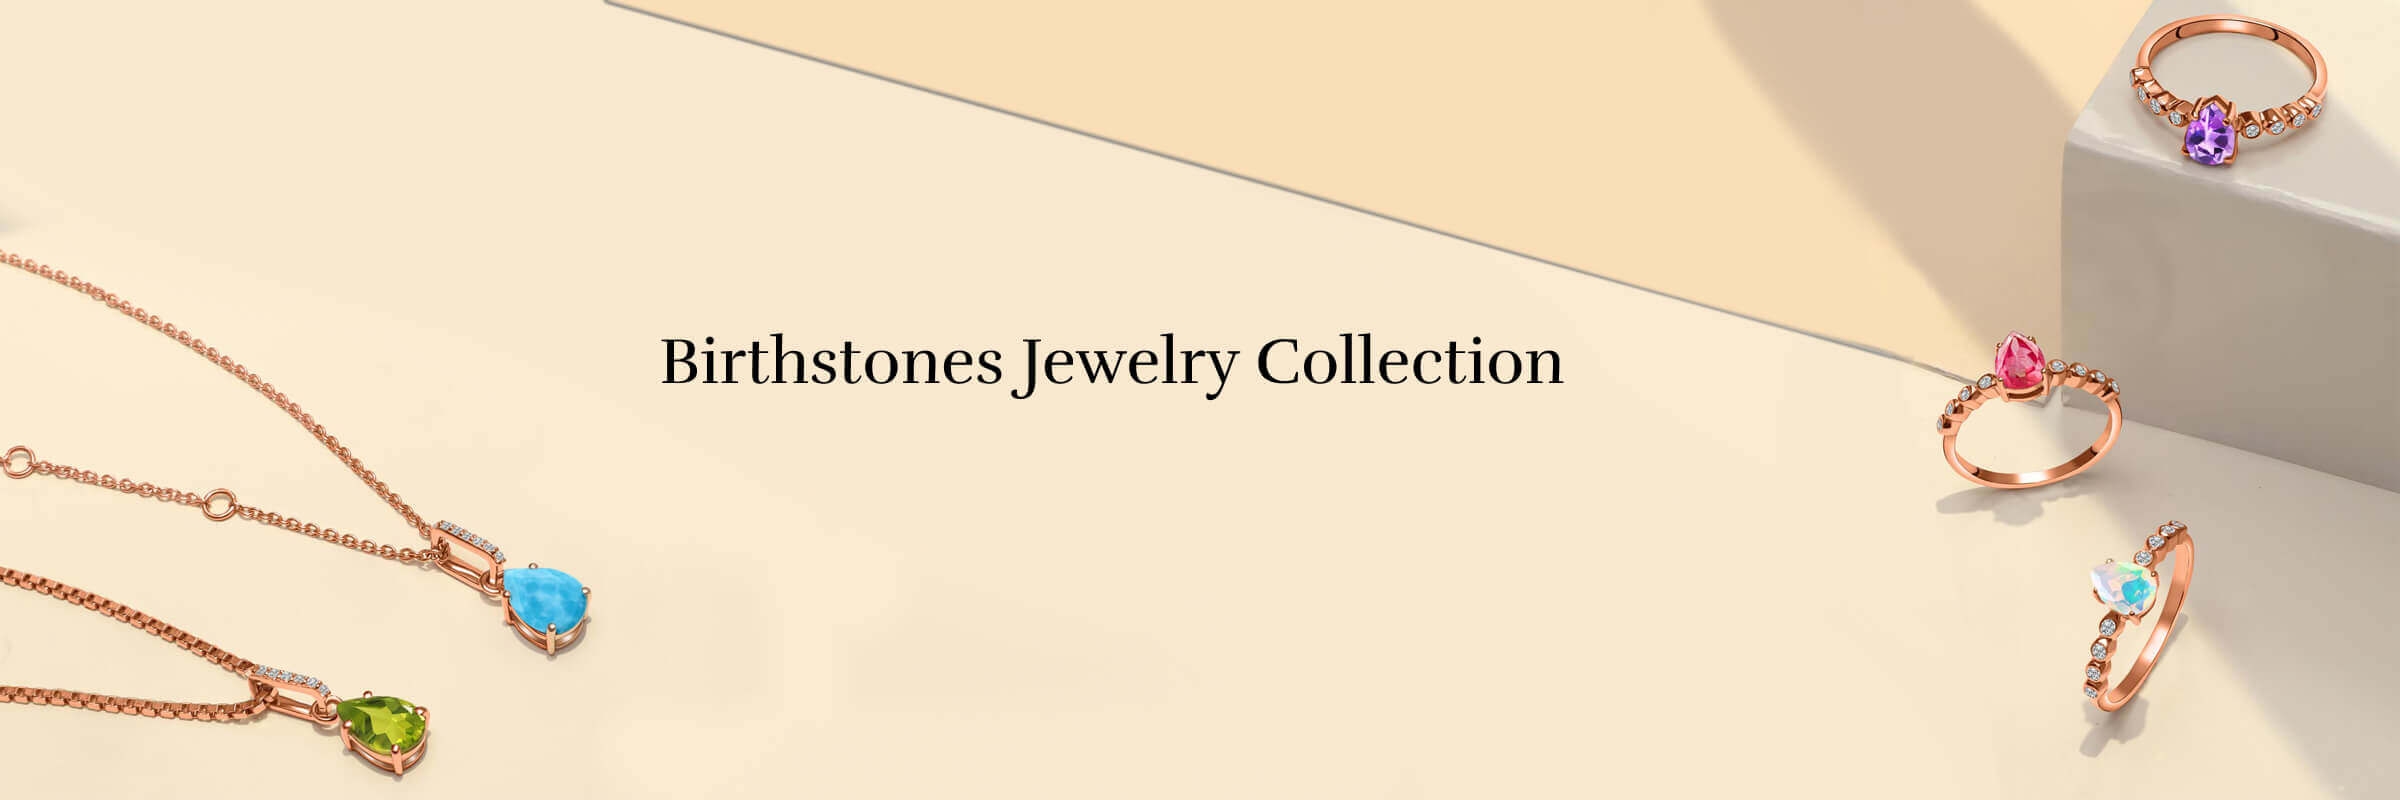 Birthstones Jewelry: Traditional Gifts of Jewelry in The Modern Age 1